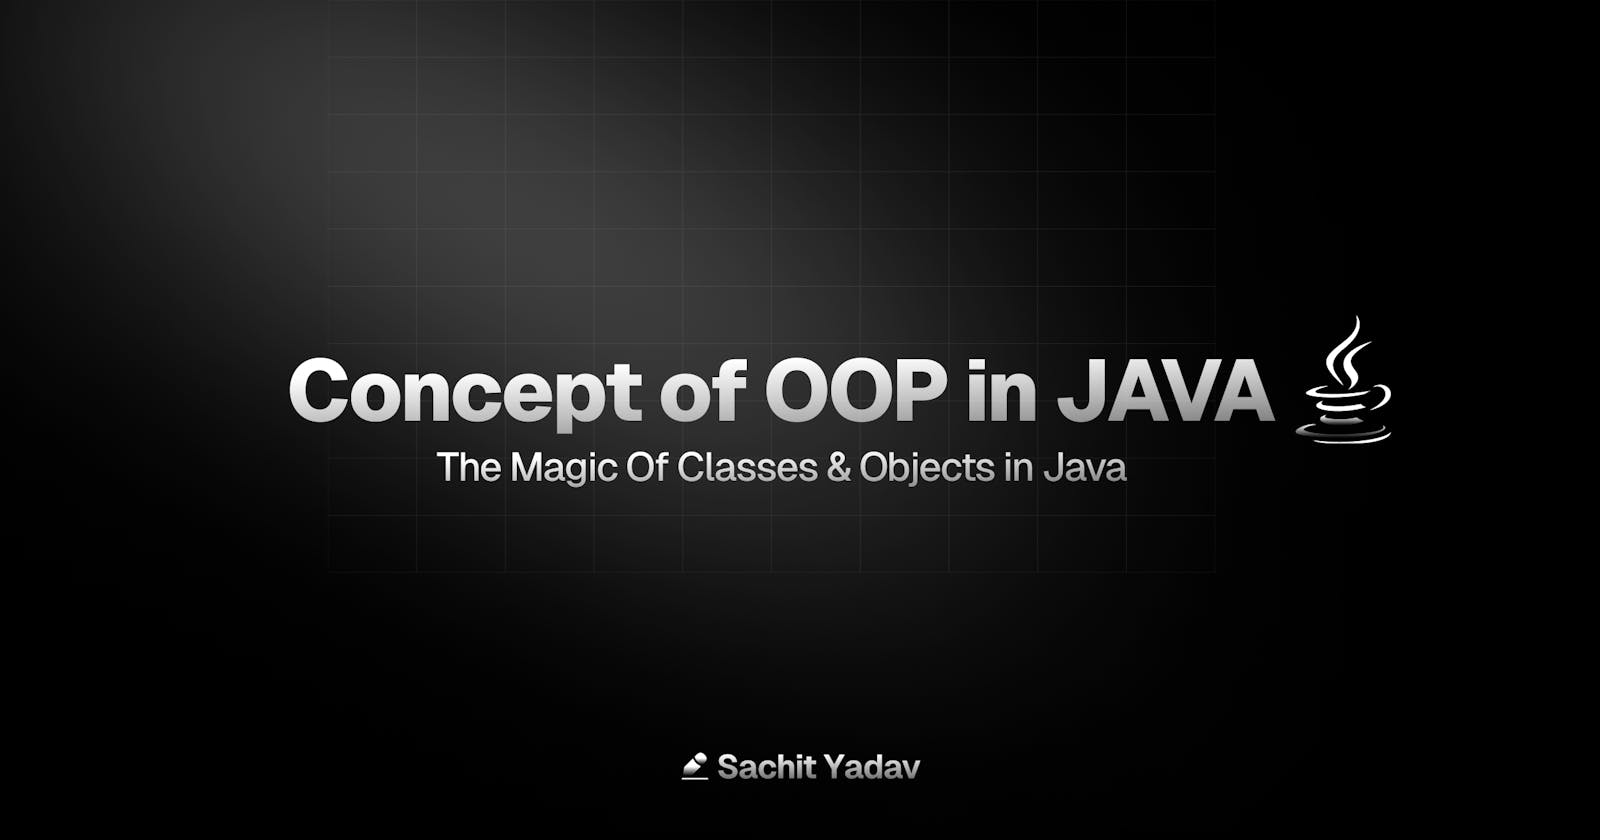 The Magic of OOP, Classes, and Objects in Java